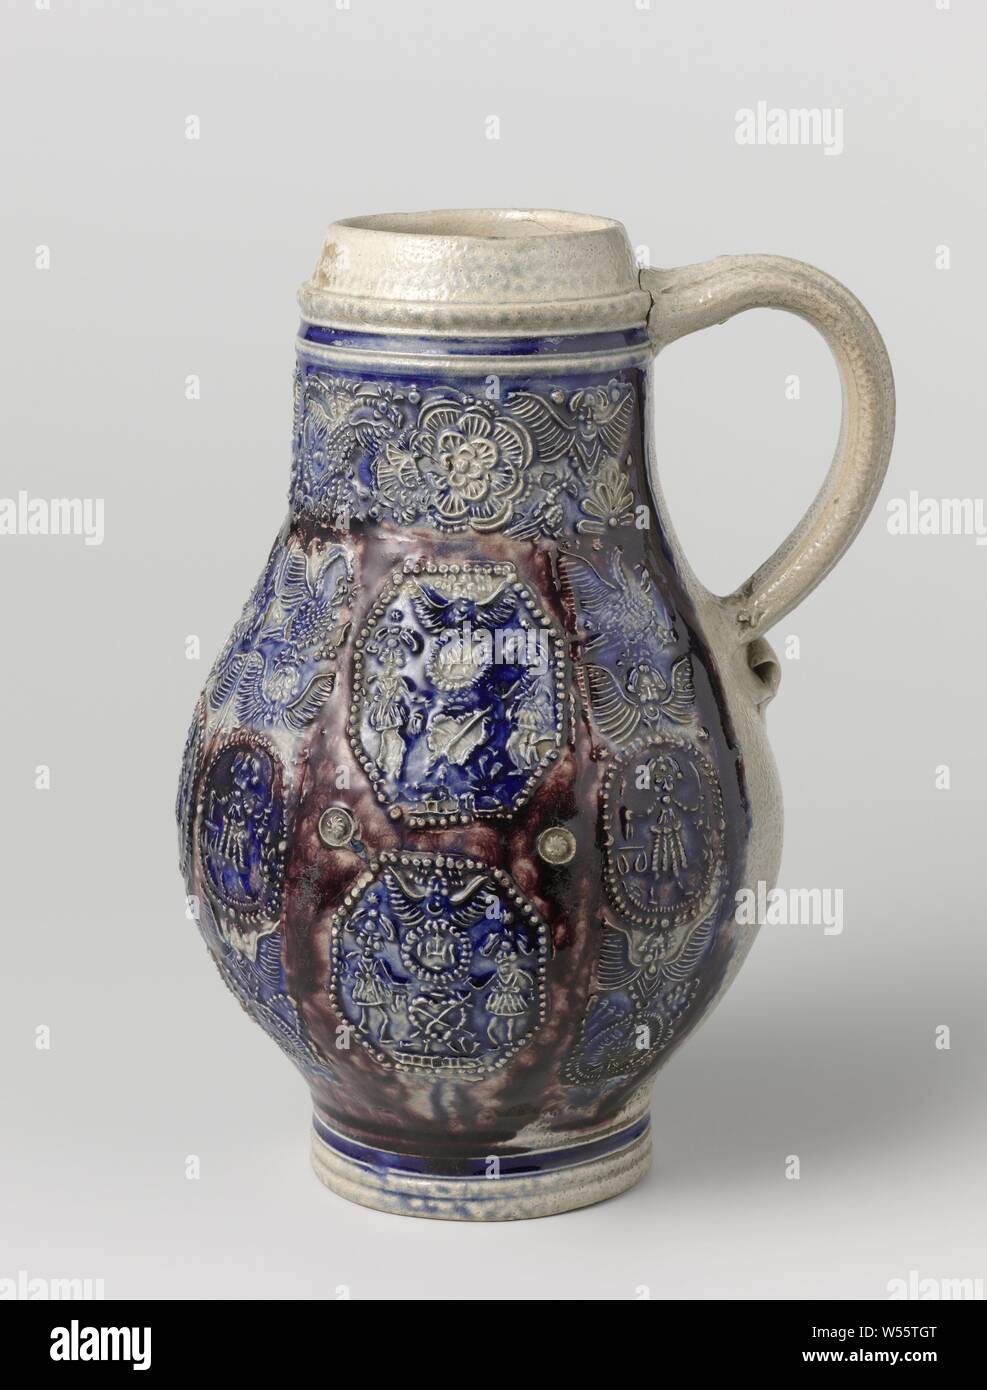 Jug with medallions, birds and flowers, Stoneware jug on stand ring with a pear-shaped body and wide neck. The C-shaped ear is attached to the neck and shoulder. Profiles on the neck and foot. Partially covered with cobalt blue and manganese purple. The front of the belly with various printed and imposed decorations embossed. Four times an octagonal medallion with the inscription 'IHS' surrounded by two men, an angel and a heart. These medallions are interspersed with five times a vertical band with angels, a bird and a medallion with Justitia. On the neck a horizontal band with angels Stock Photo